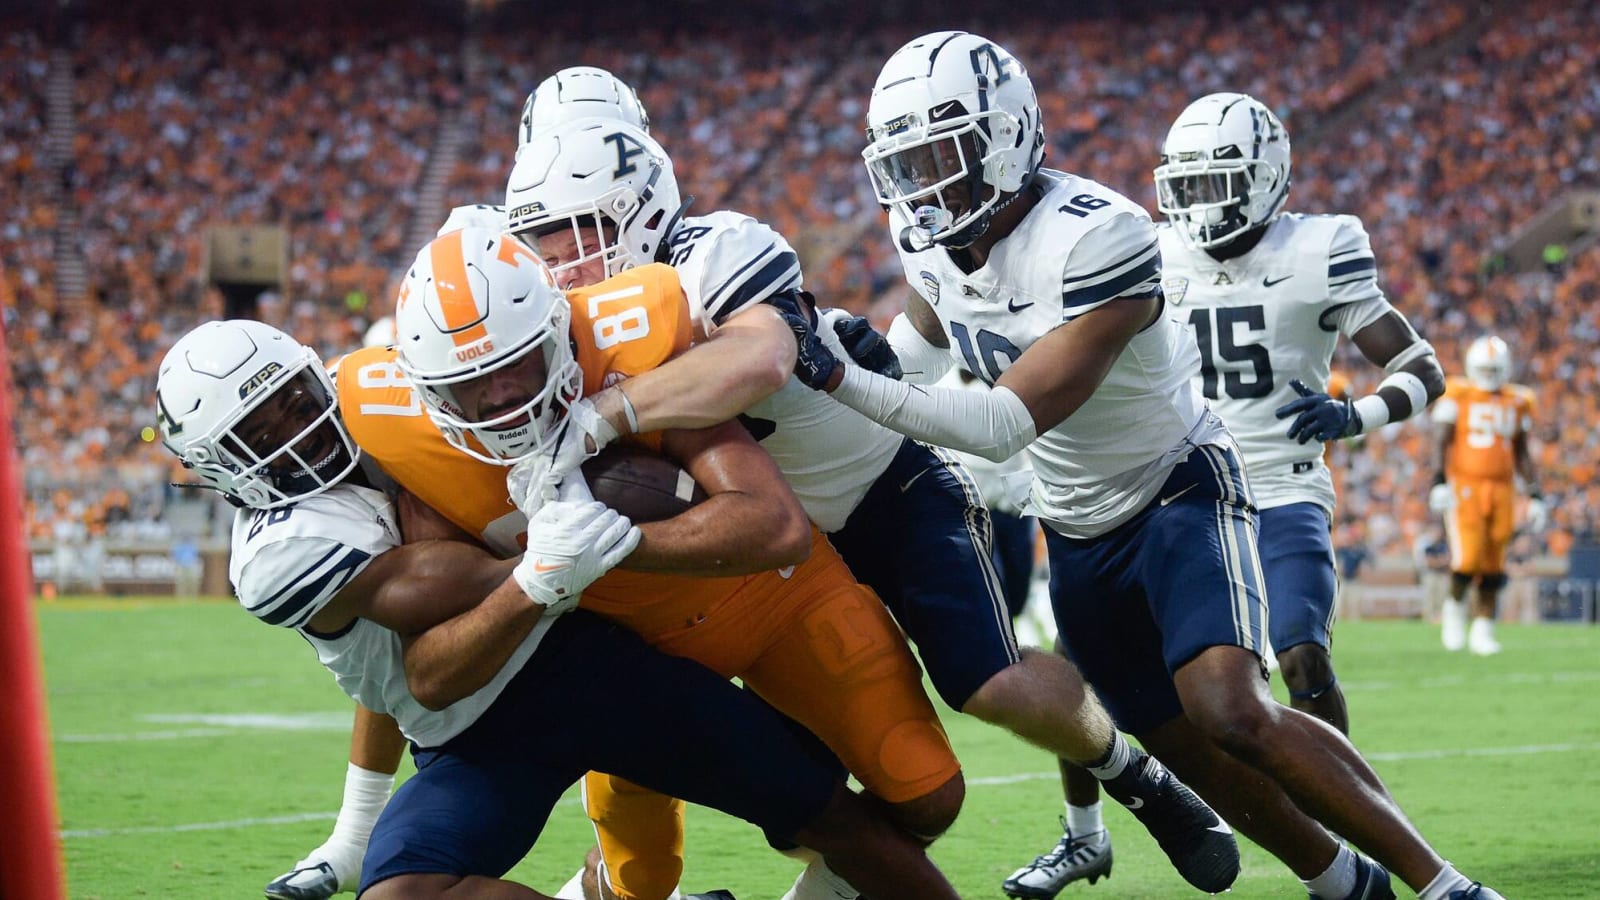 Watch: Akron punter pulls off slick move against Tennessee